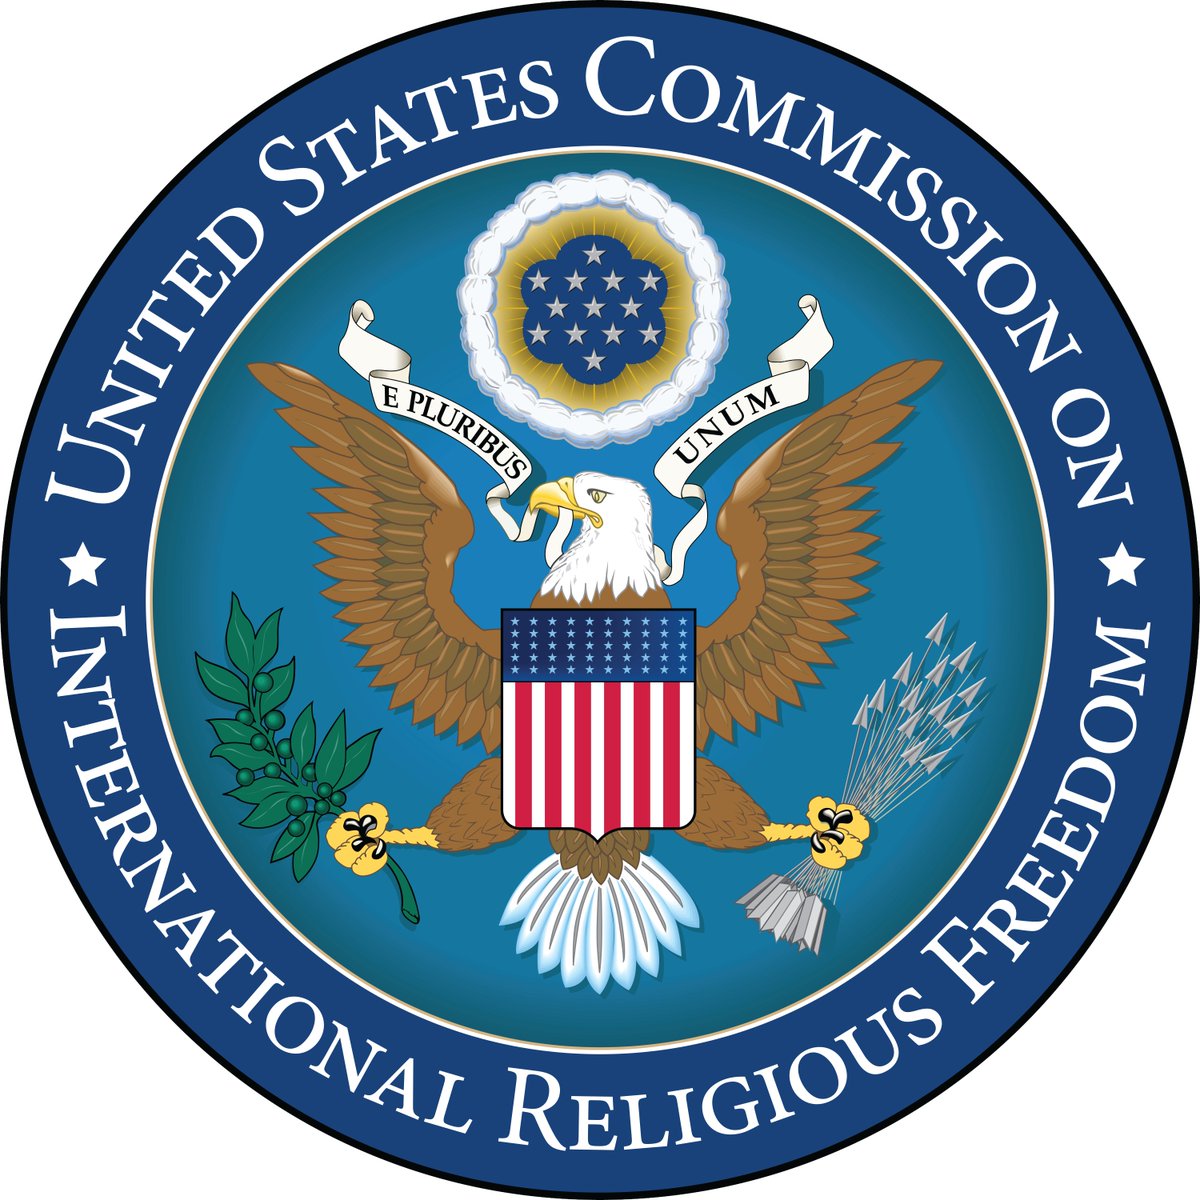 Tomorrow, May 10 at 10:30 am ET, I will testify before the Congressional Committee on International Religious Freedom on violations of religious freedom in North and East Syria. Register here: bit.ly/3Pconbq